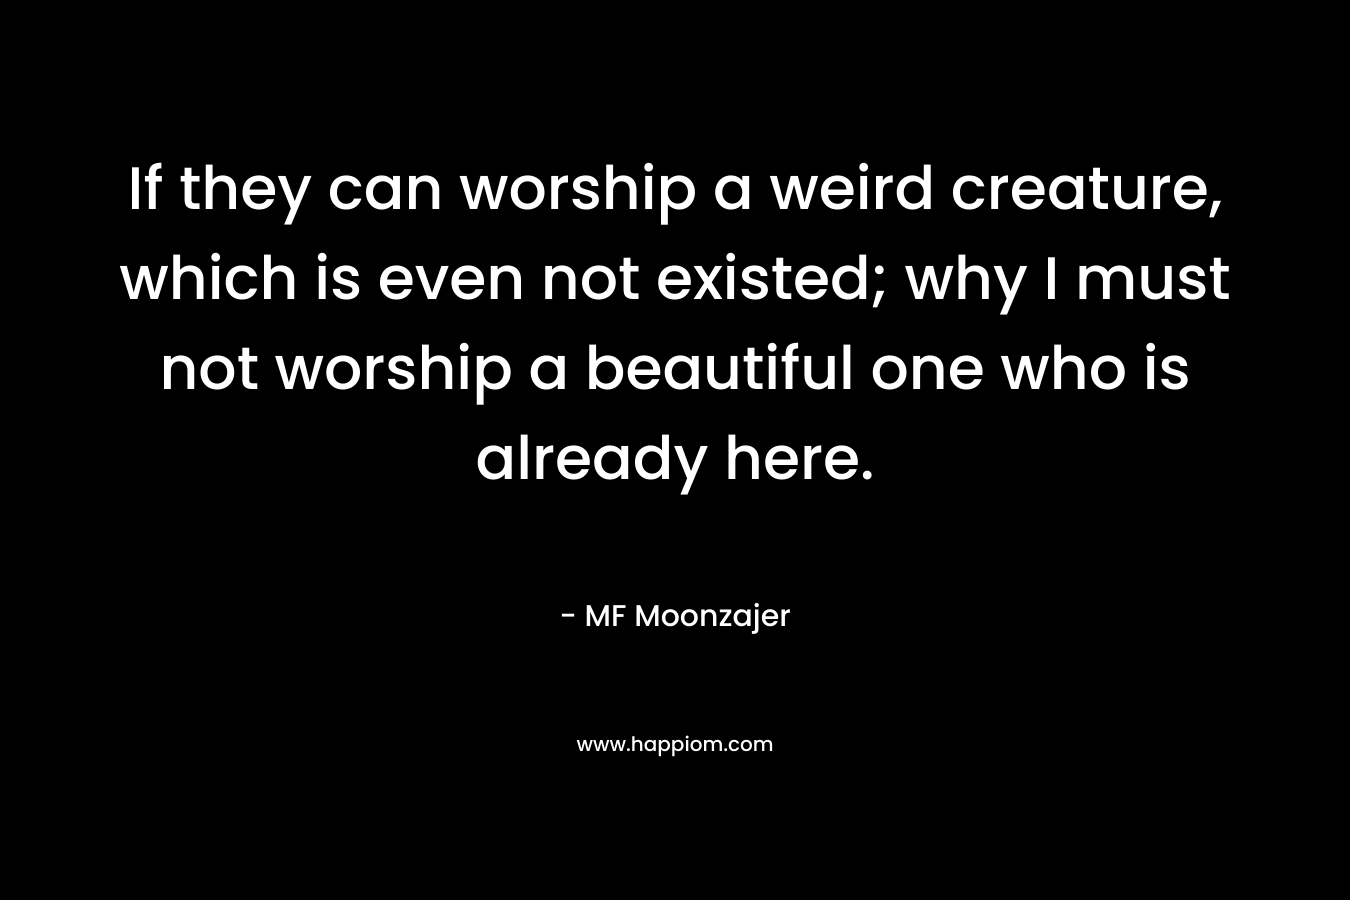 If they can worship a weird creature, which is even not existed; why I must not worship a beautiful one who is already here.